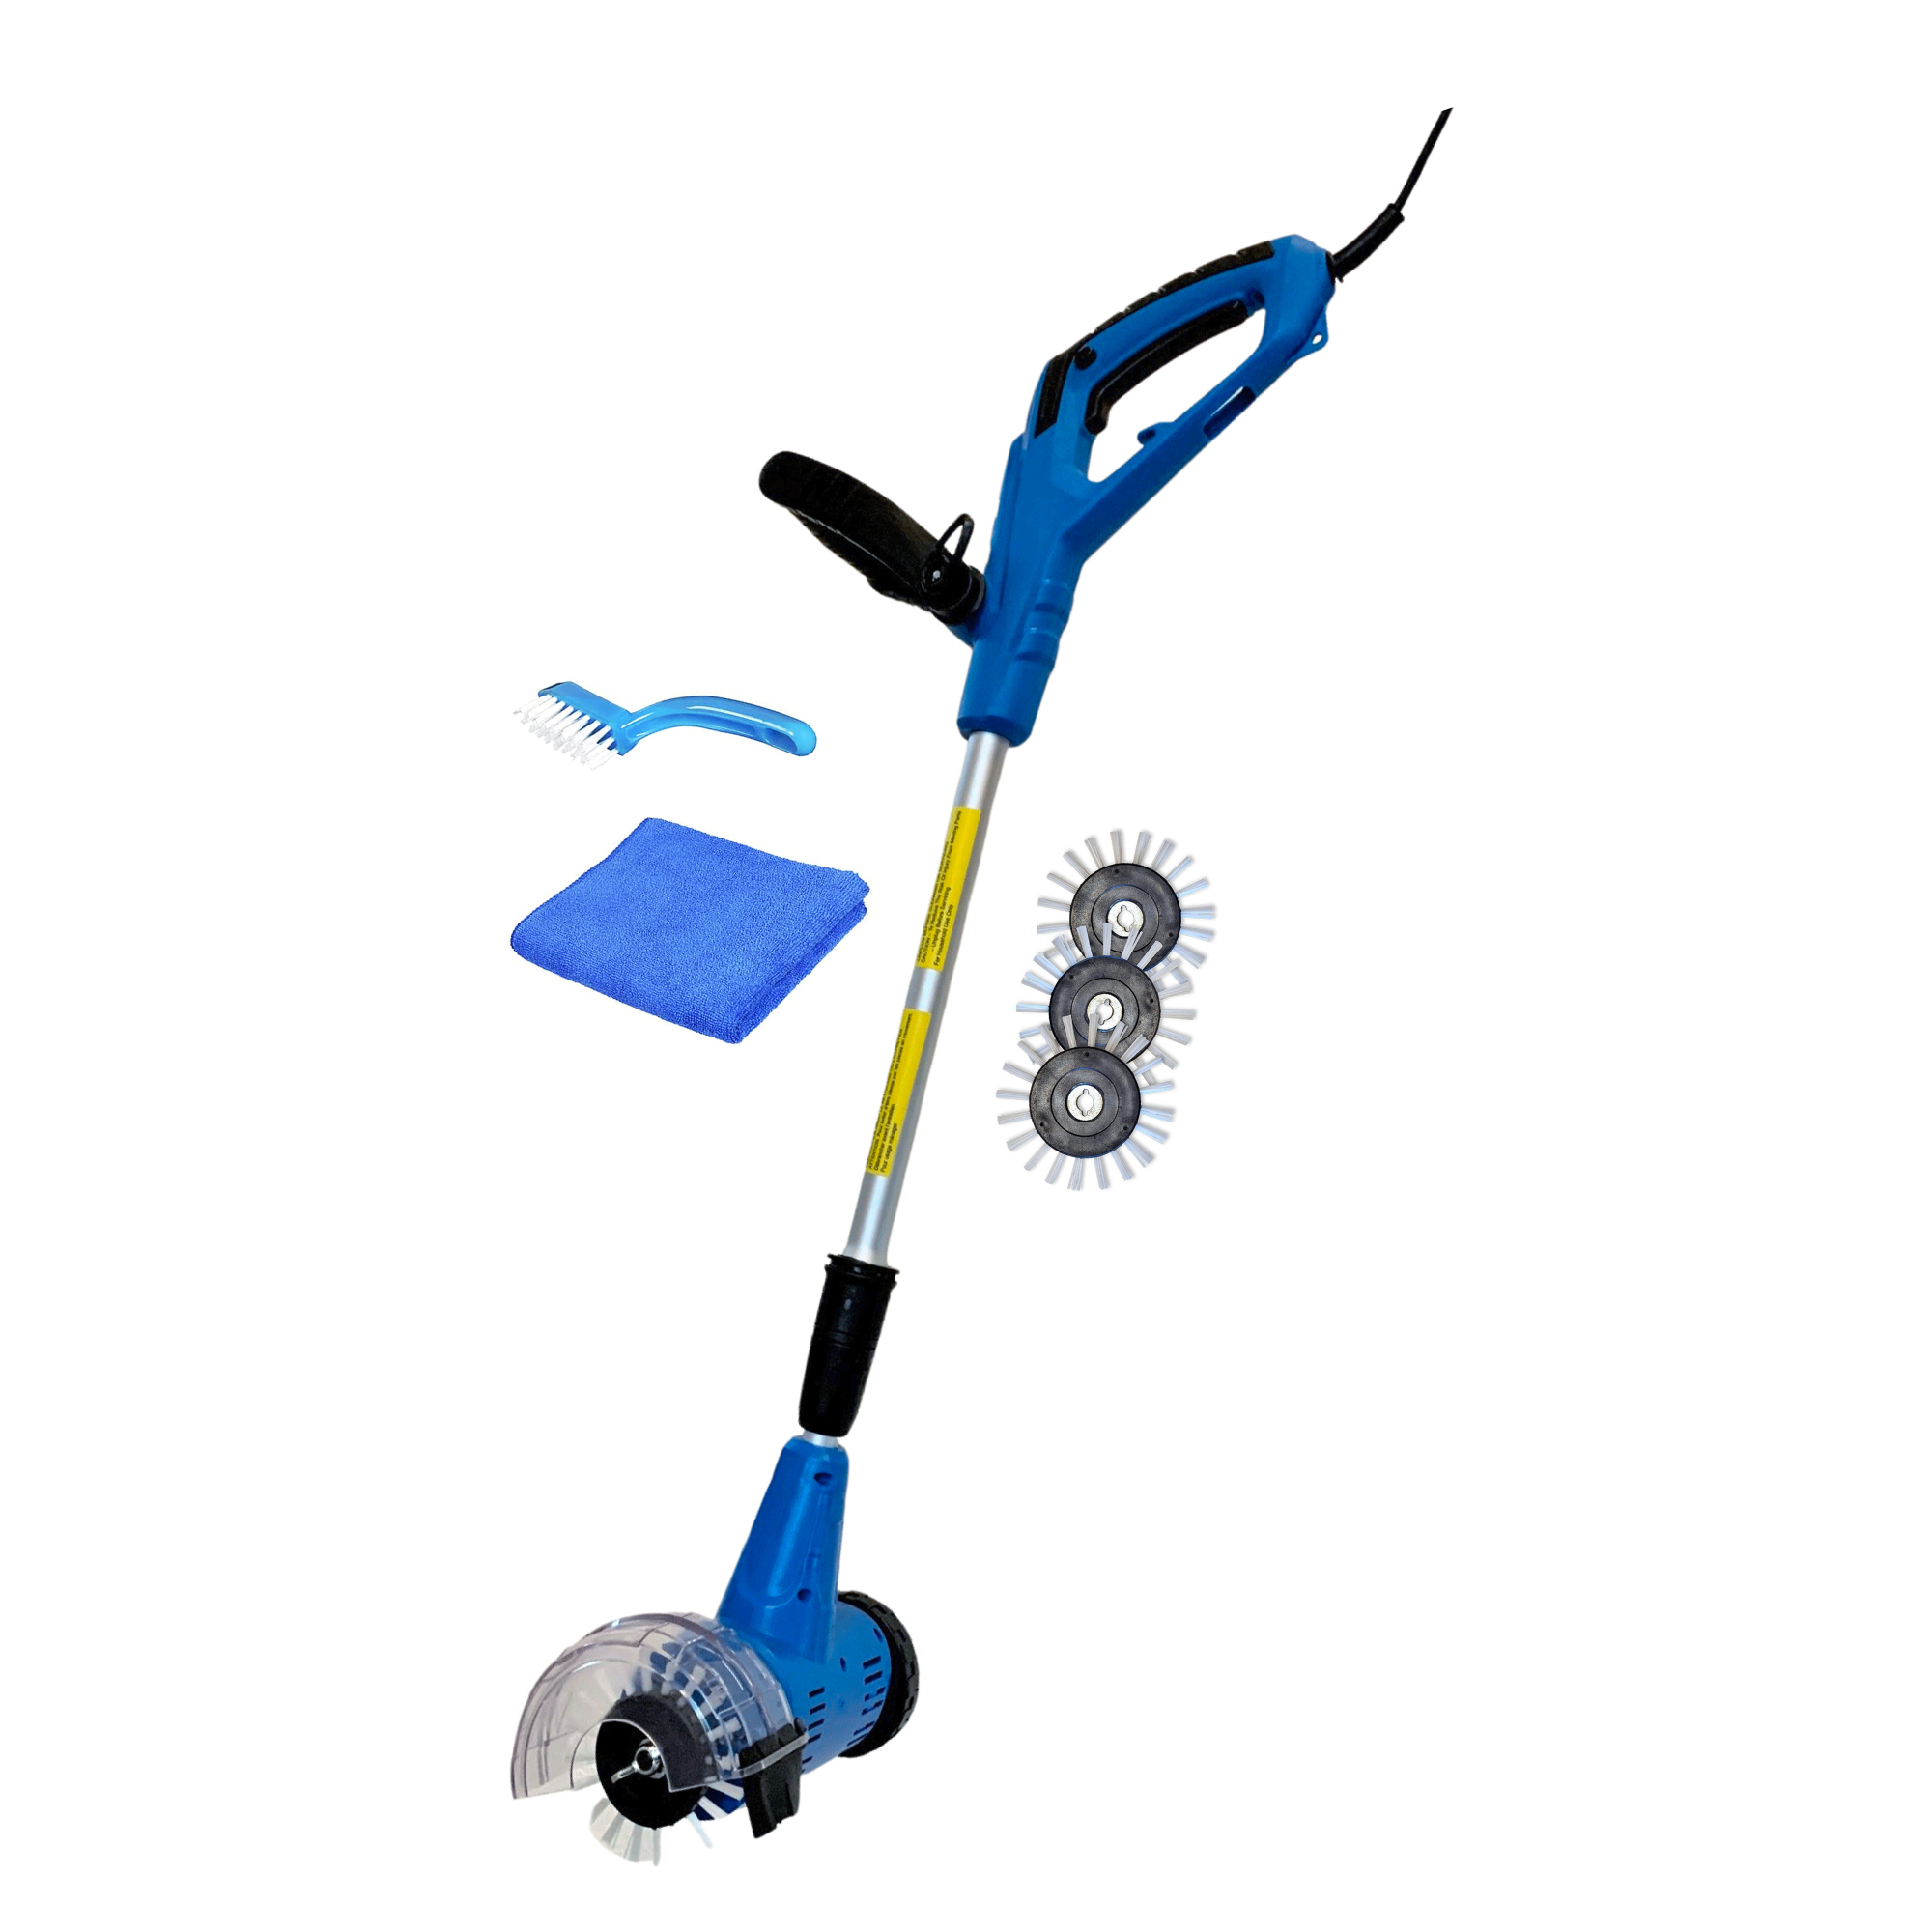 Grout Groovy Electric Stand Up Tile Grout Cleaner